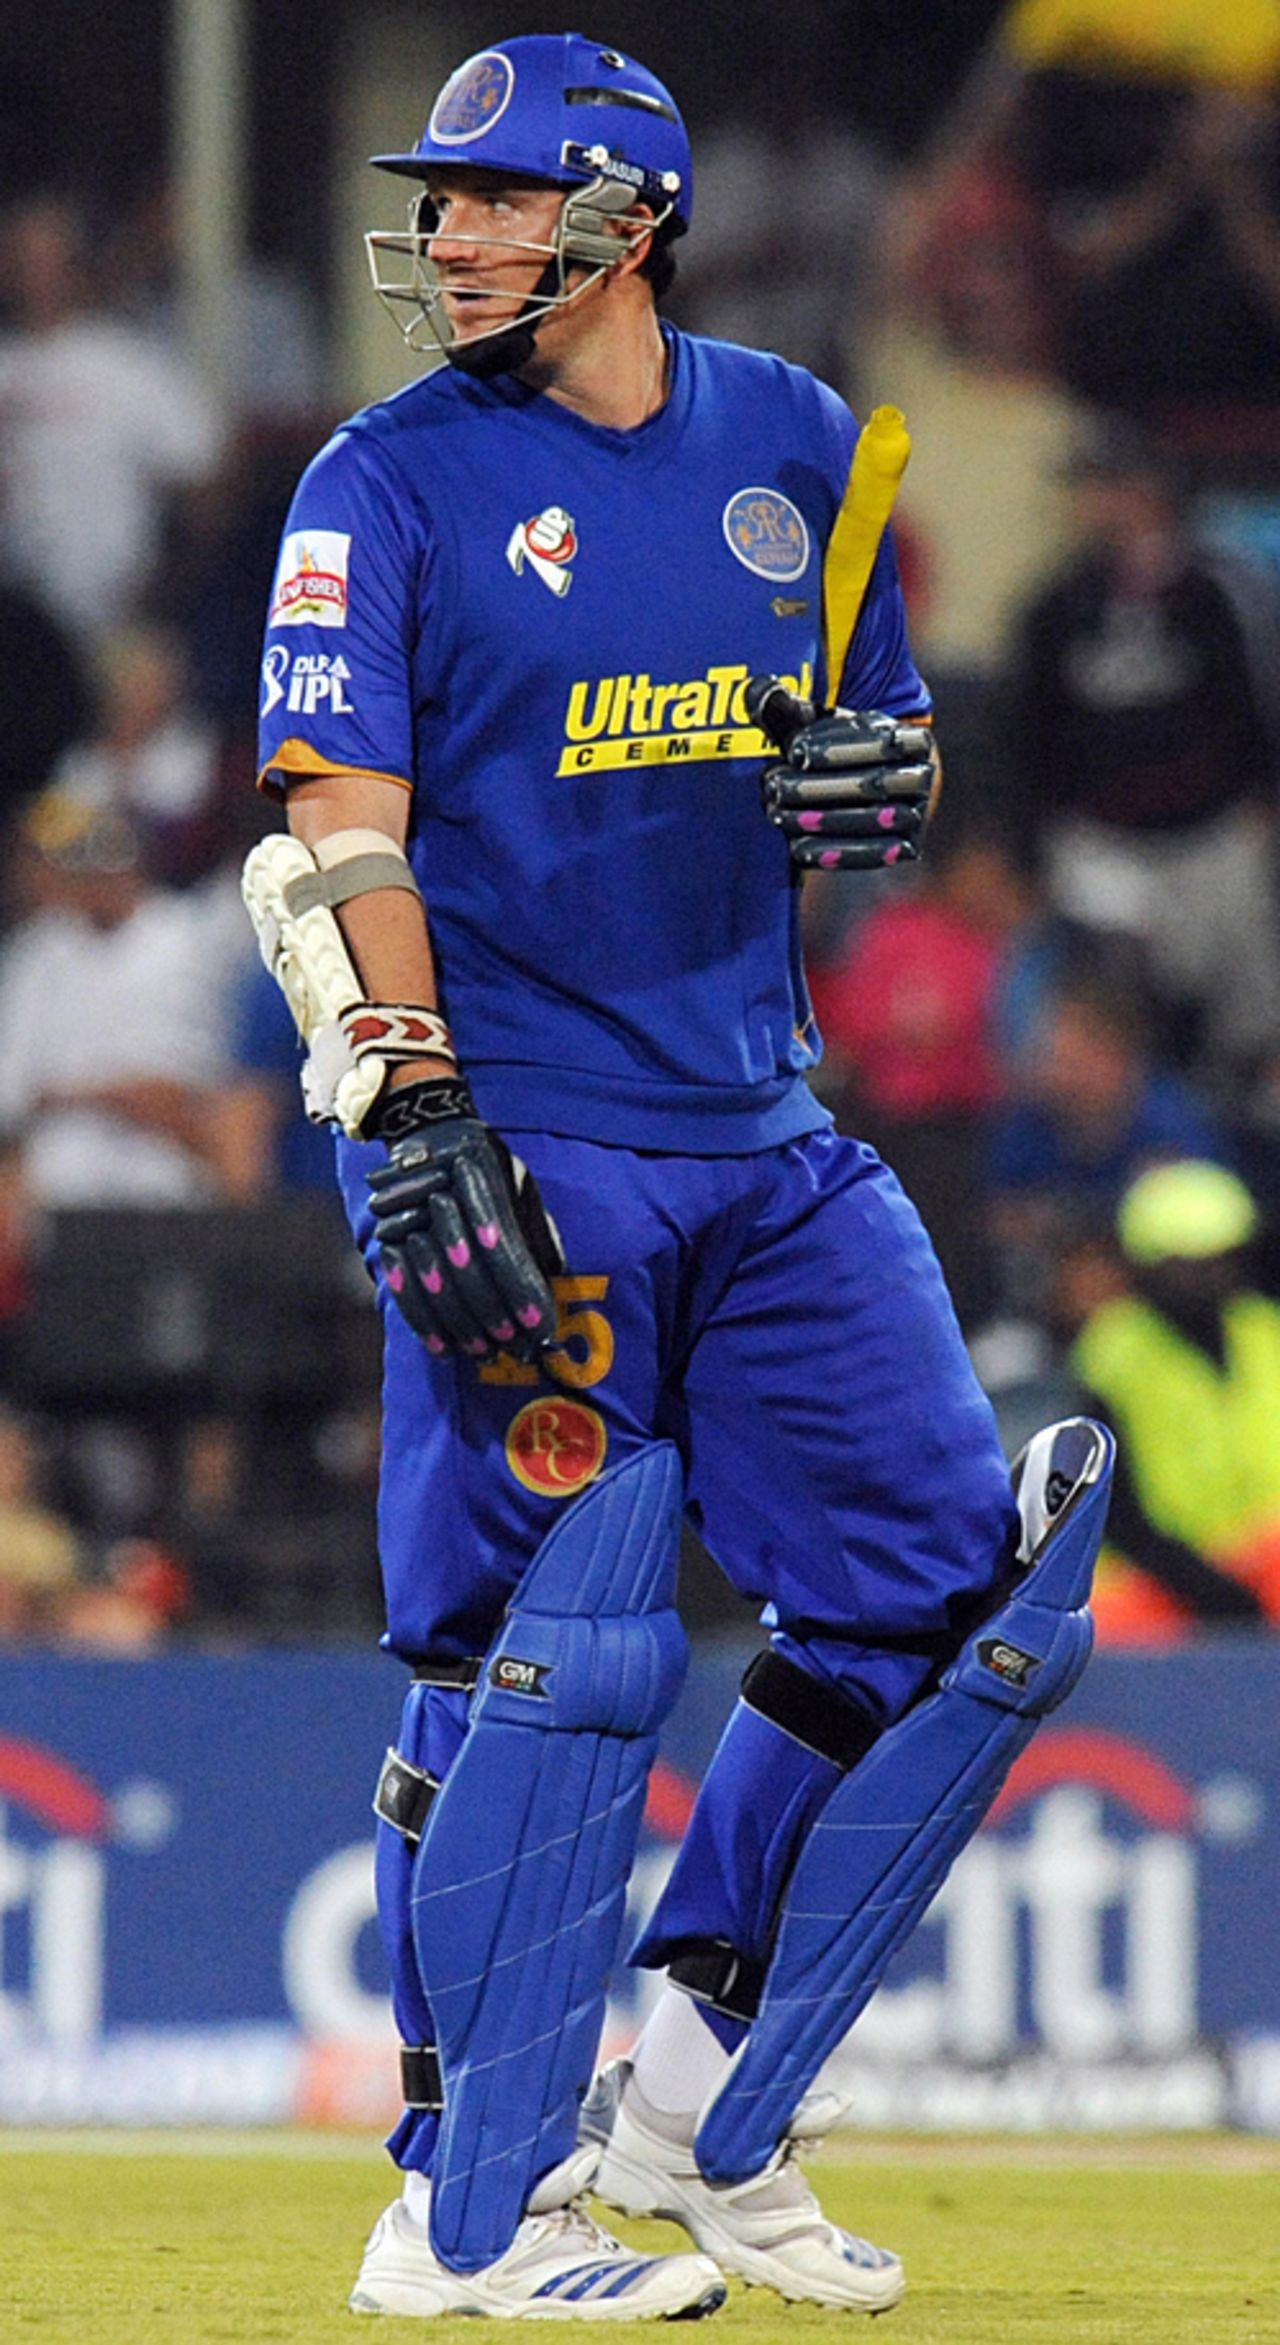 Graeme Smith could manage only 2, Chennai Super Kings v Rajasthan Royals, IPL, 22nd match, Centurion, April 30, 2009